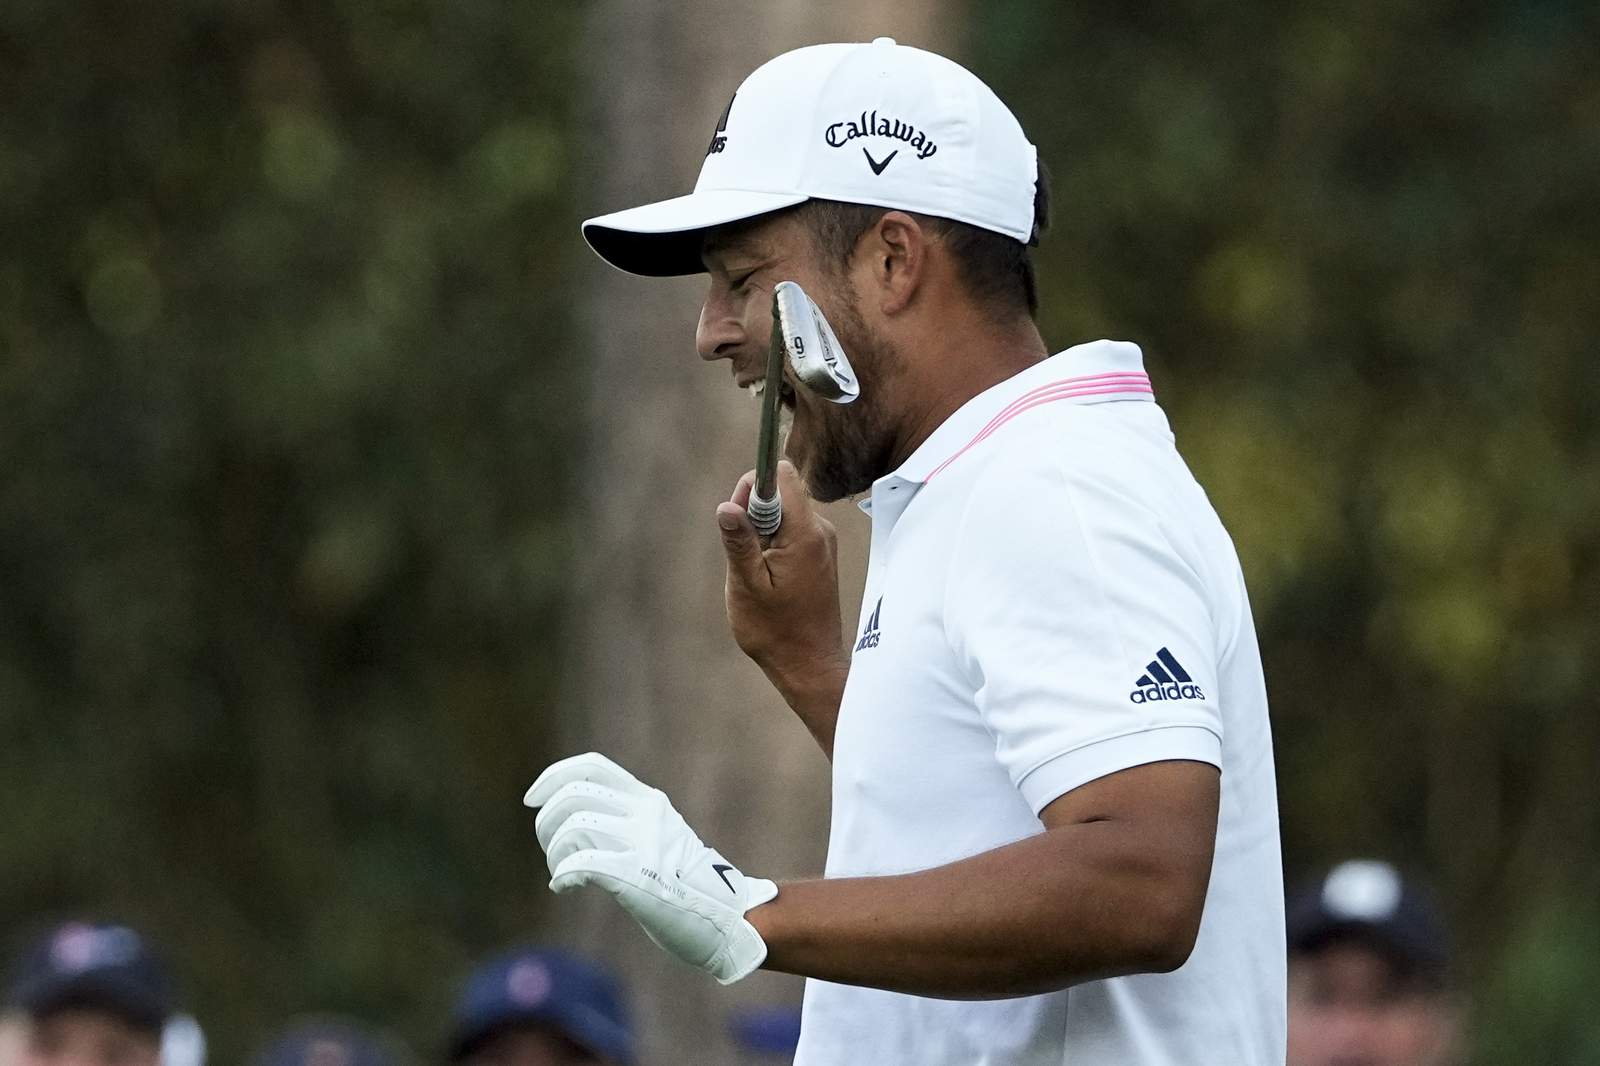 X-Man's Agony: Another close call in major for Schauffele